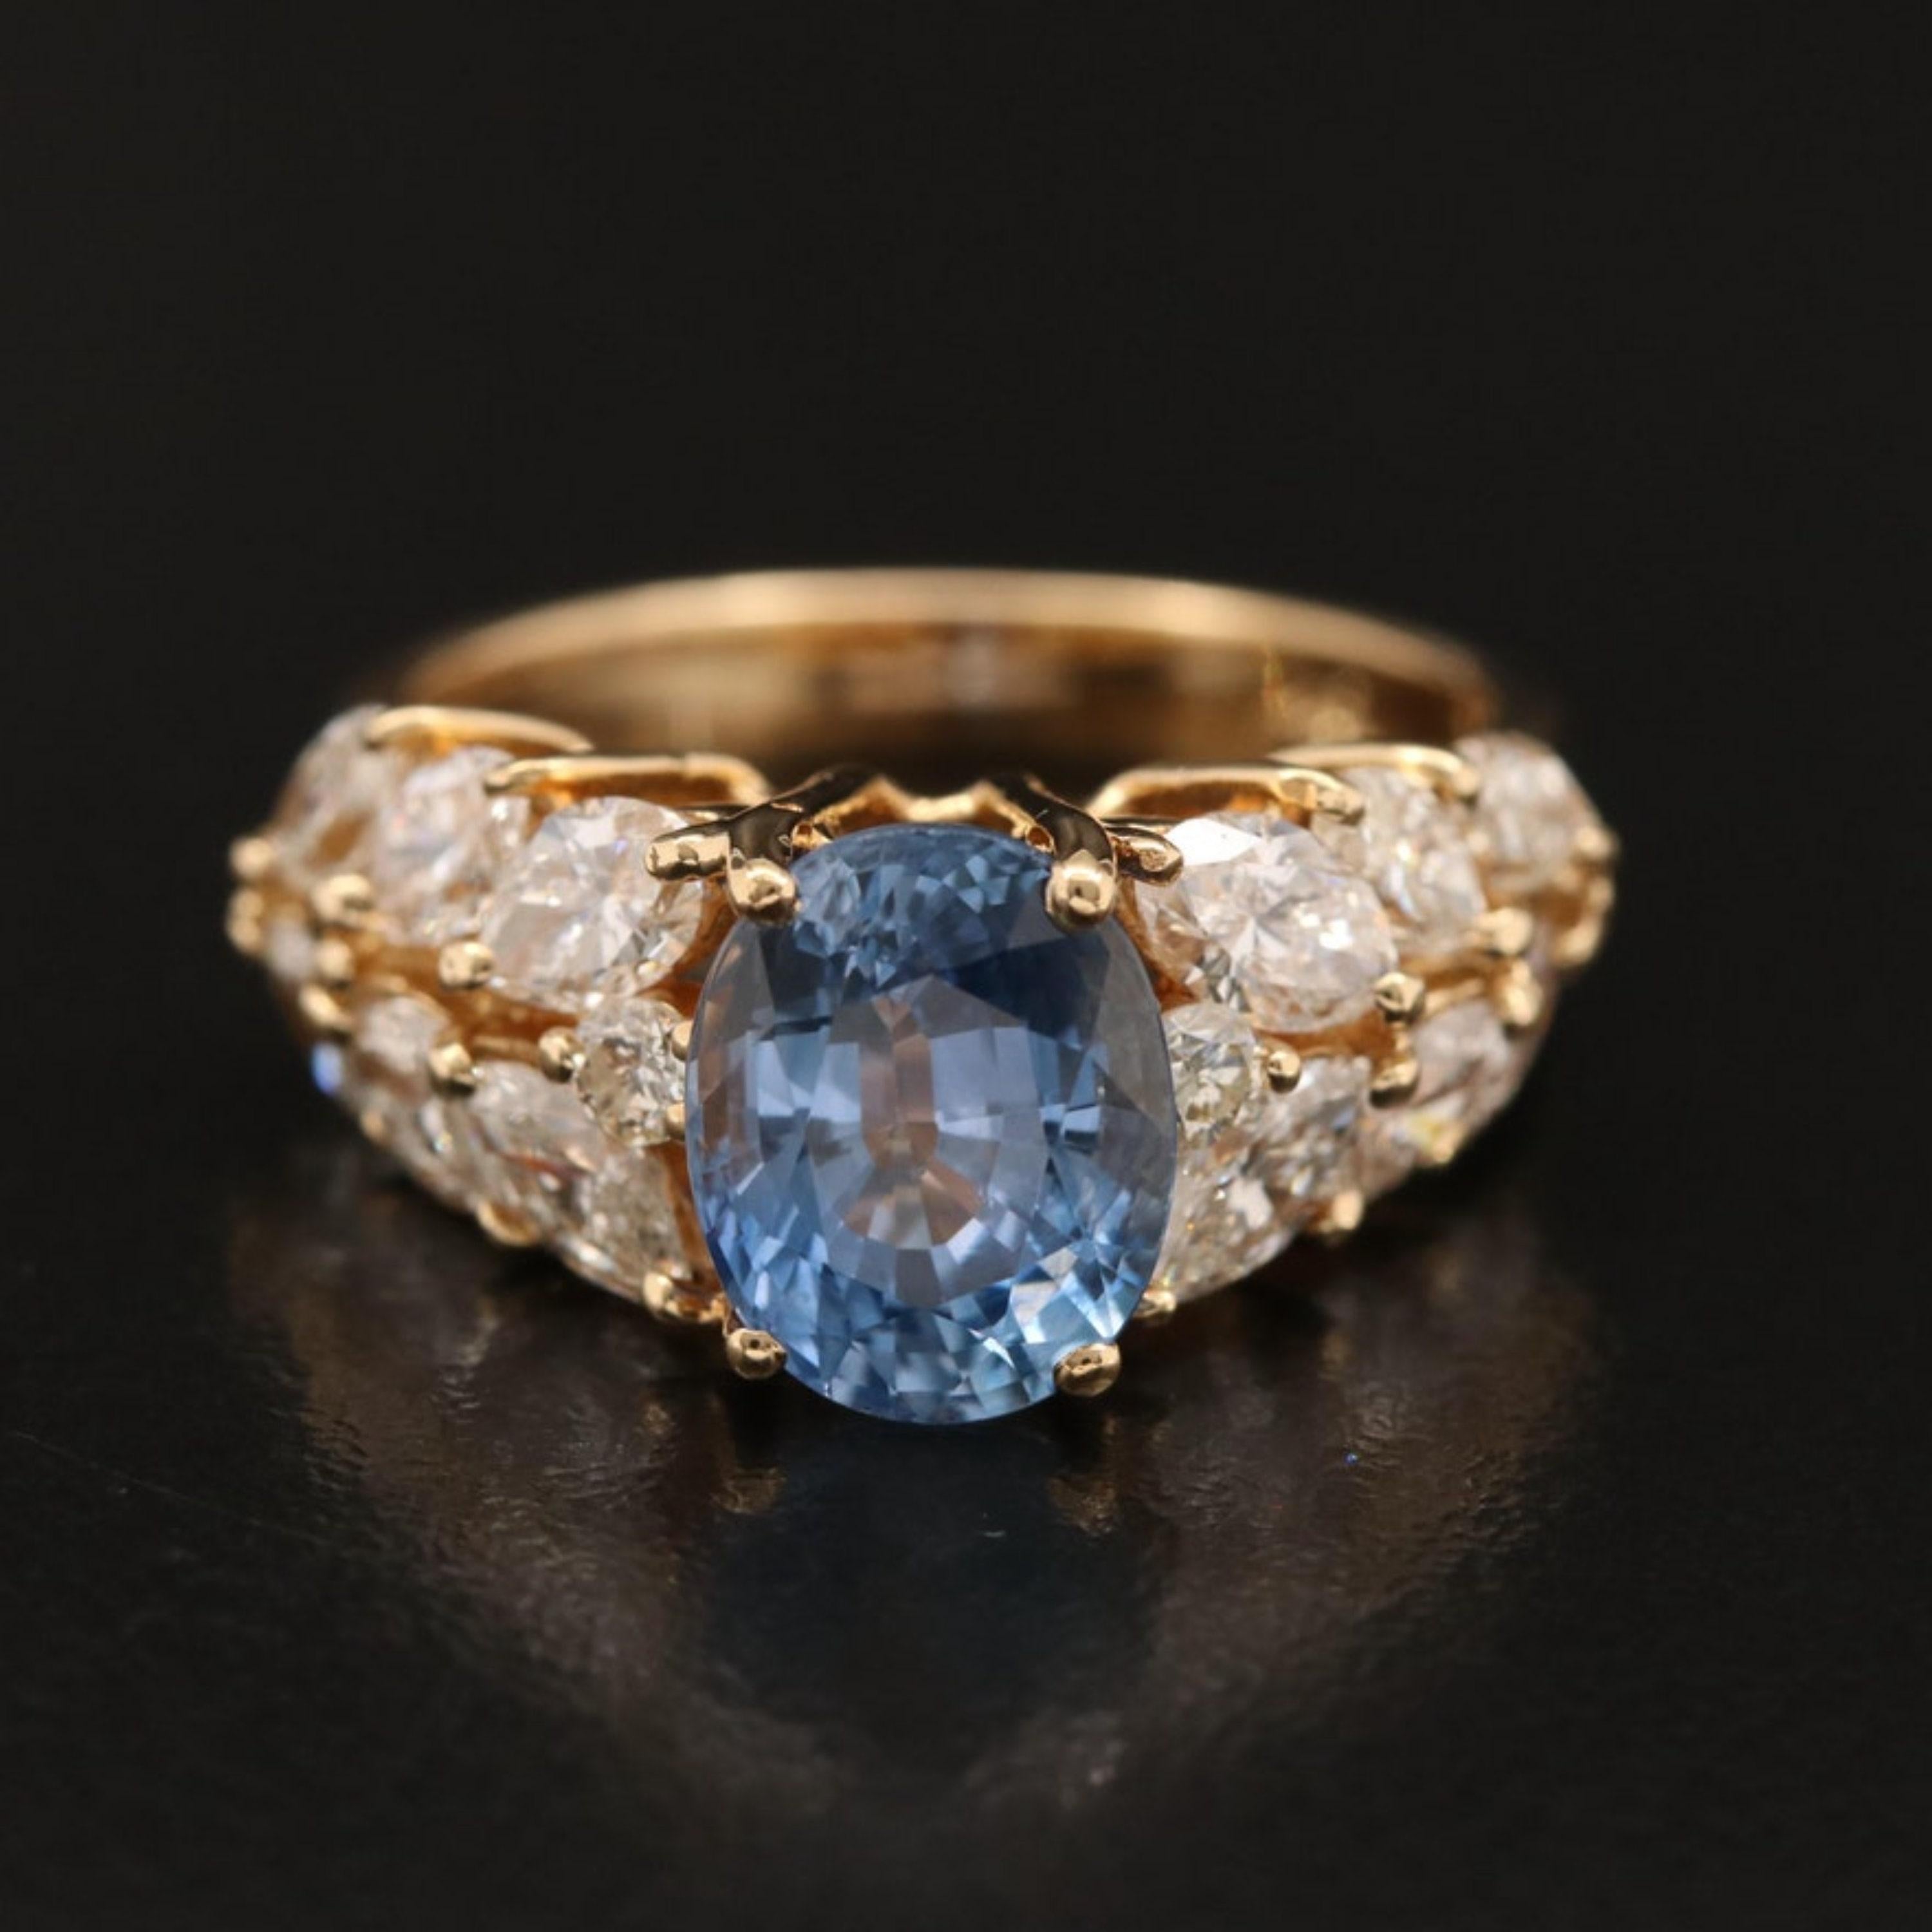 For Sale:  3 Carat Natural Sapphire Diamond Engagement Ring Set in 18K Gold, Cocktail Ring 4